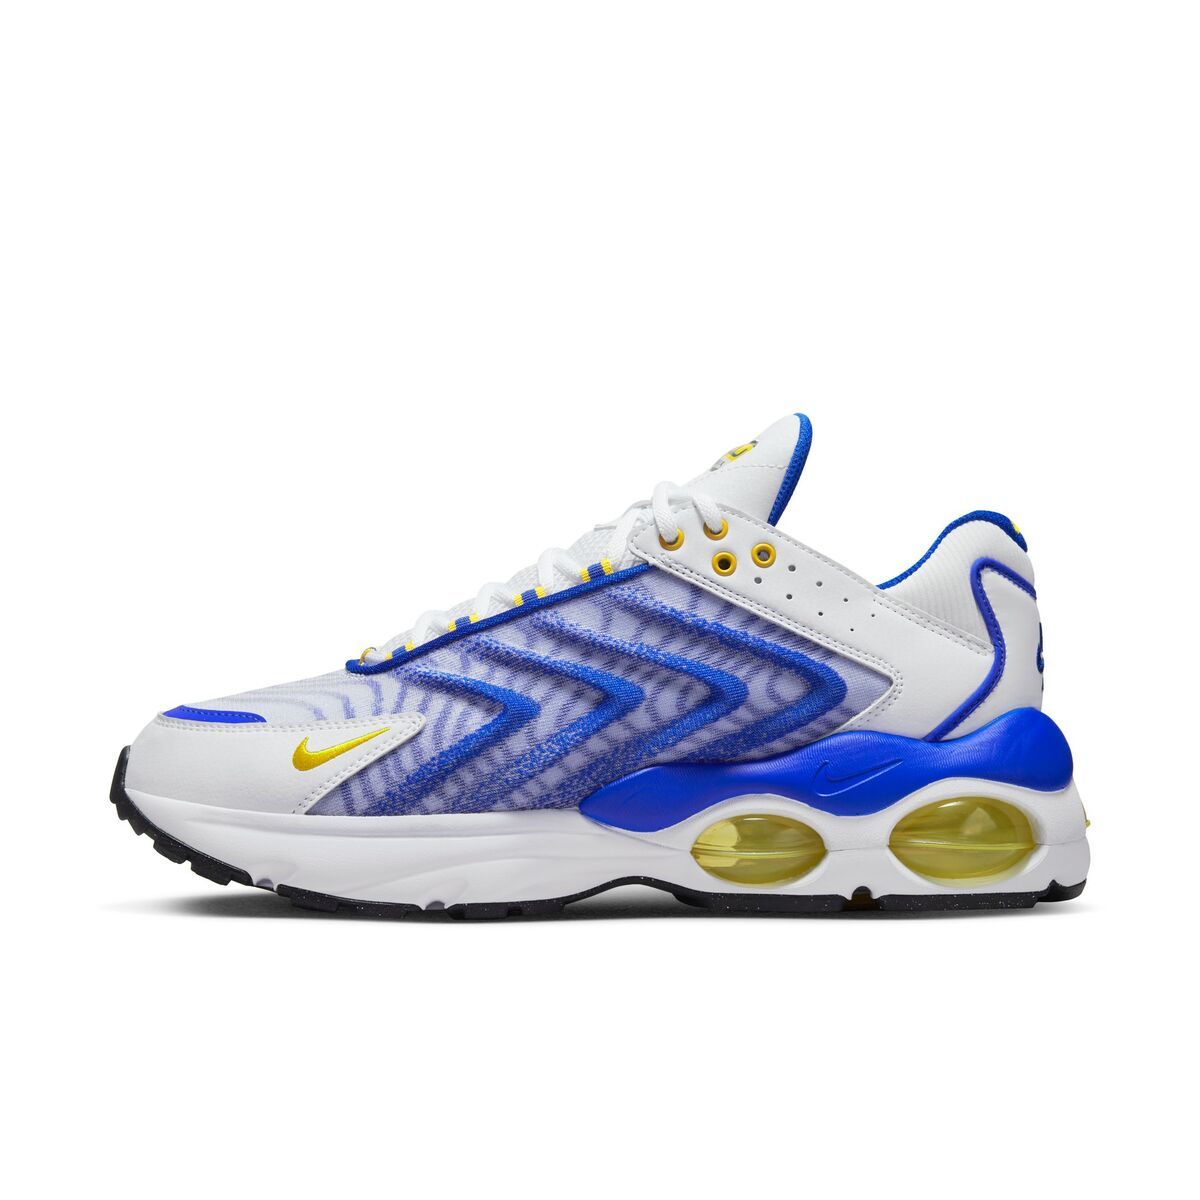 Air Max TW - Racer Blue and Speed Yellow